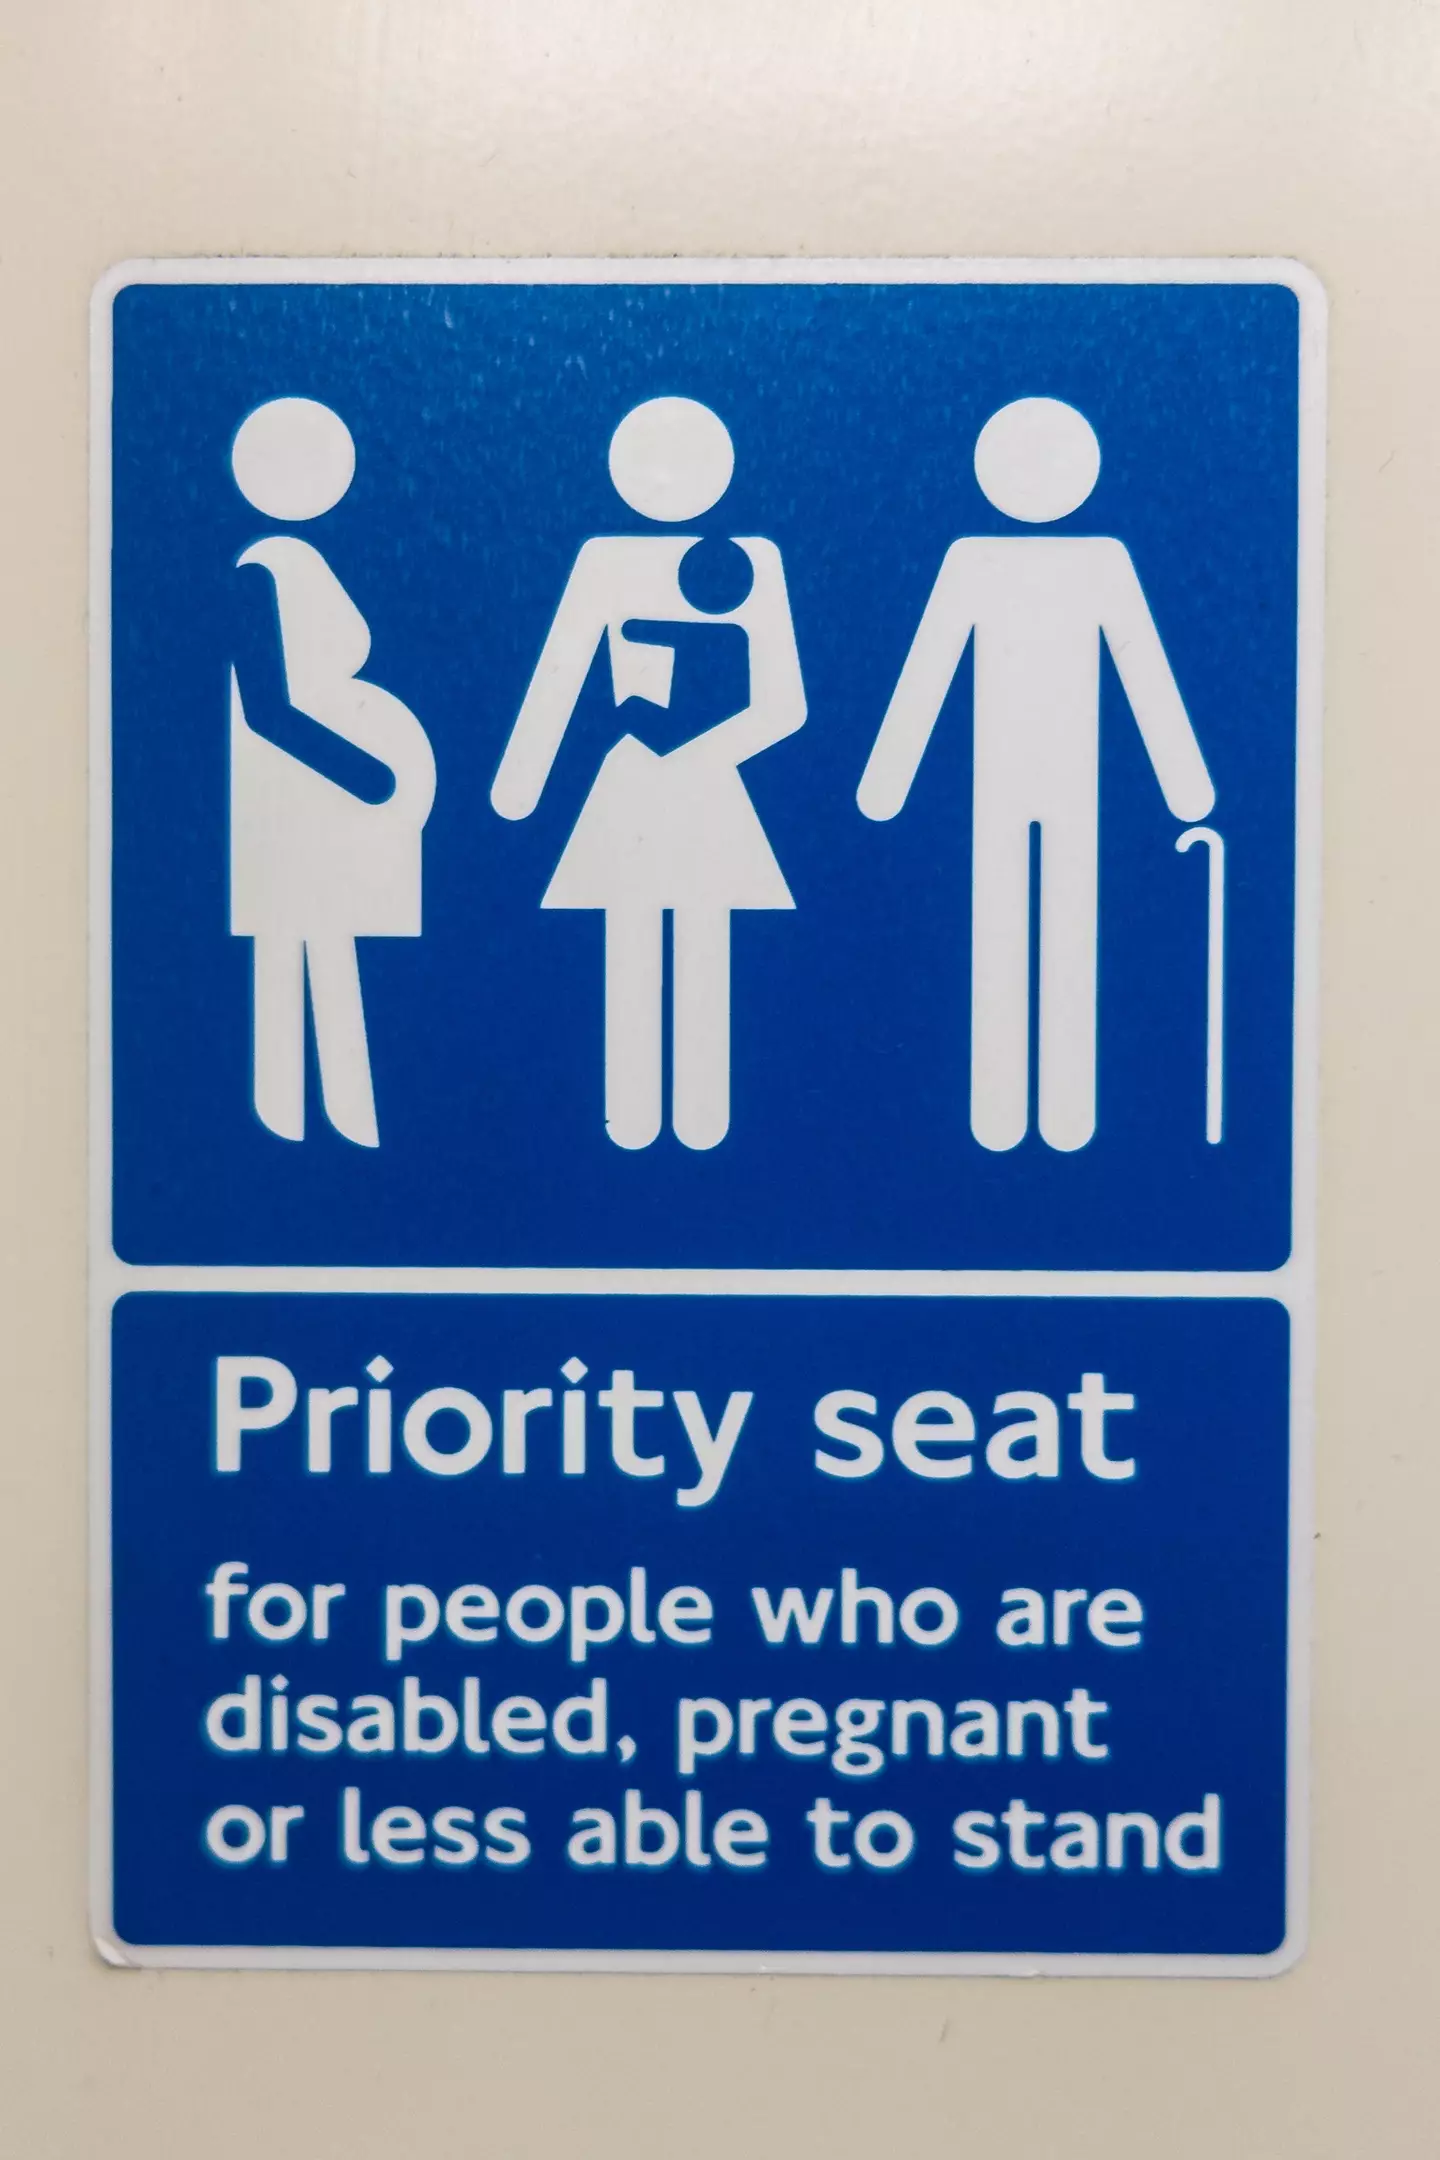 There's usually a sign to tell you where the priority seats are.